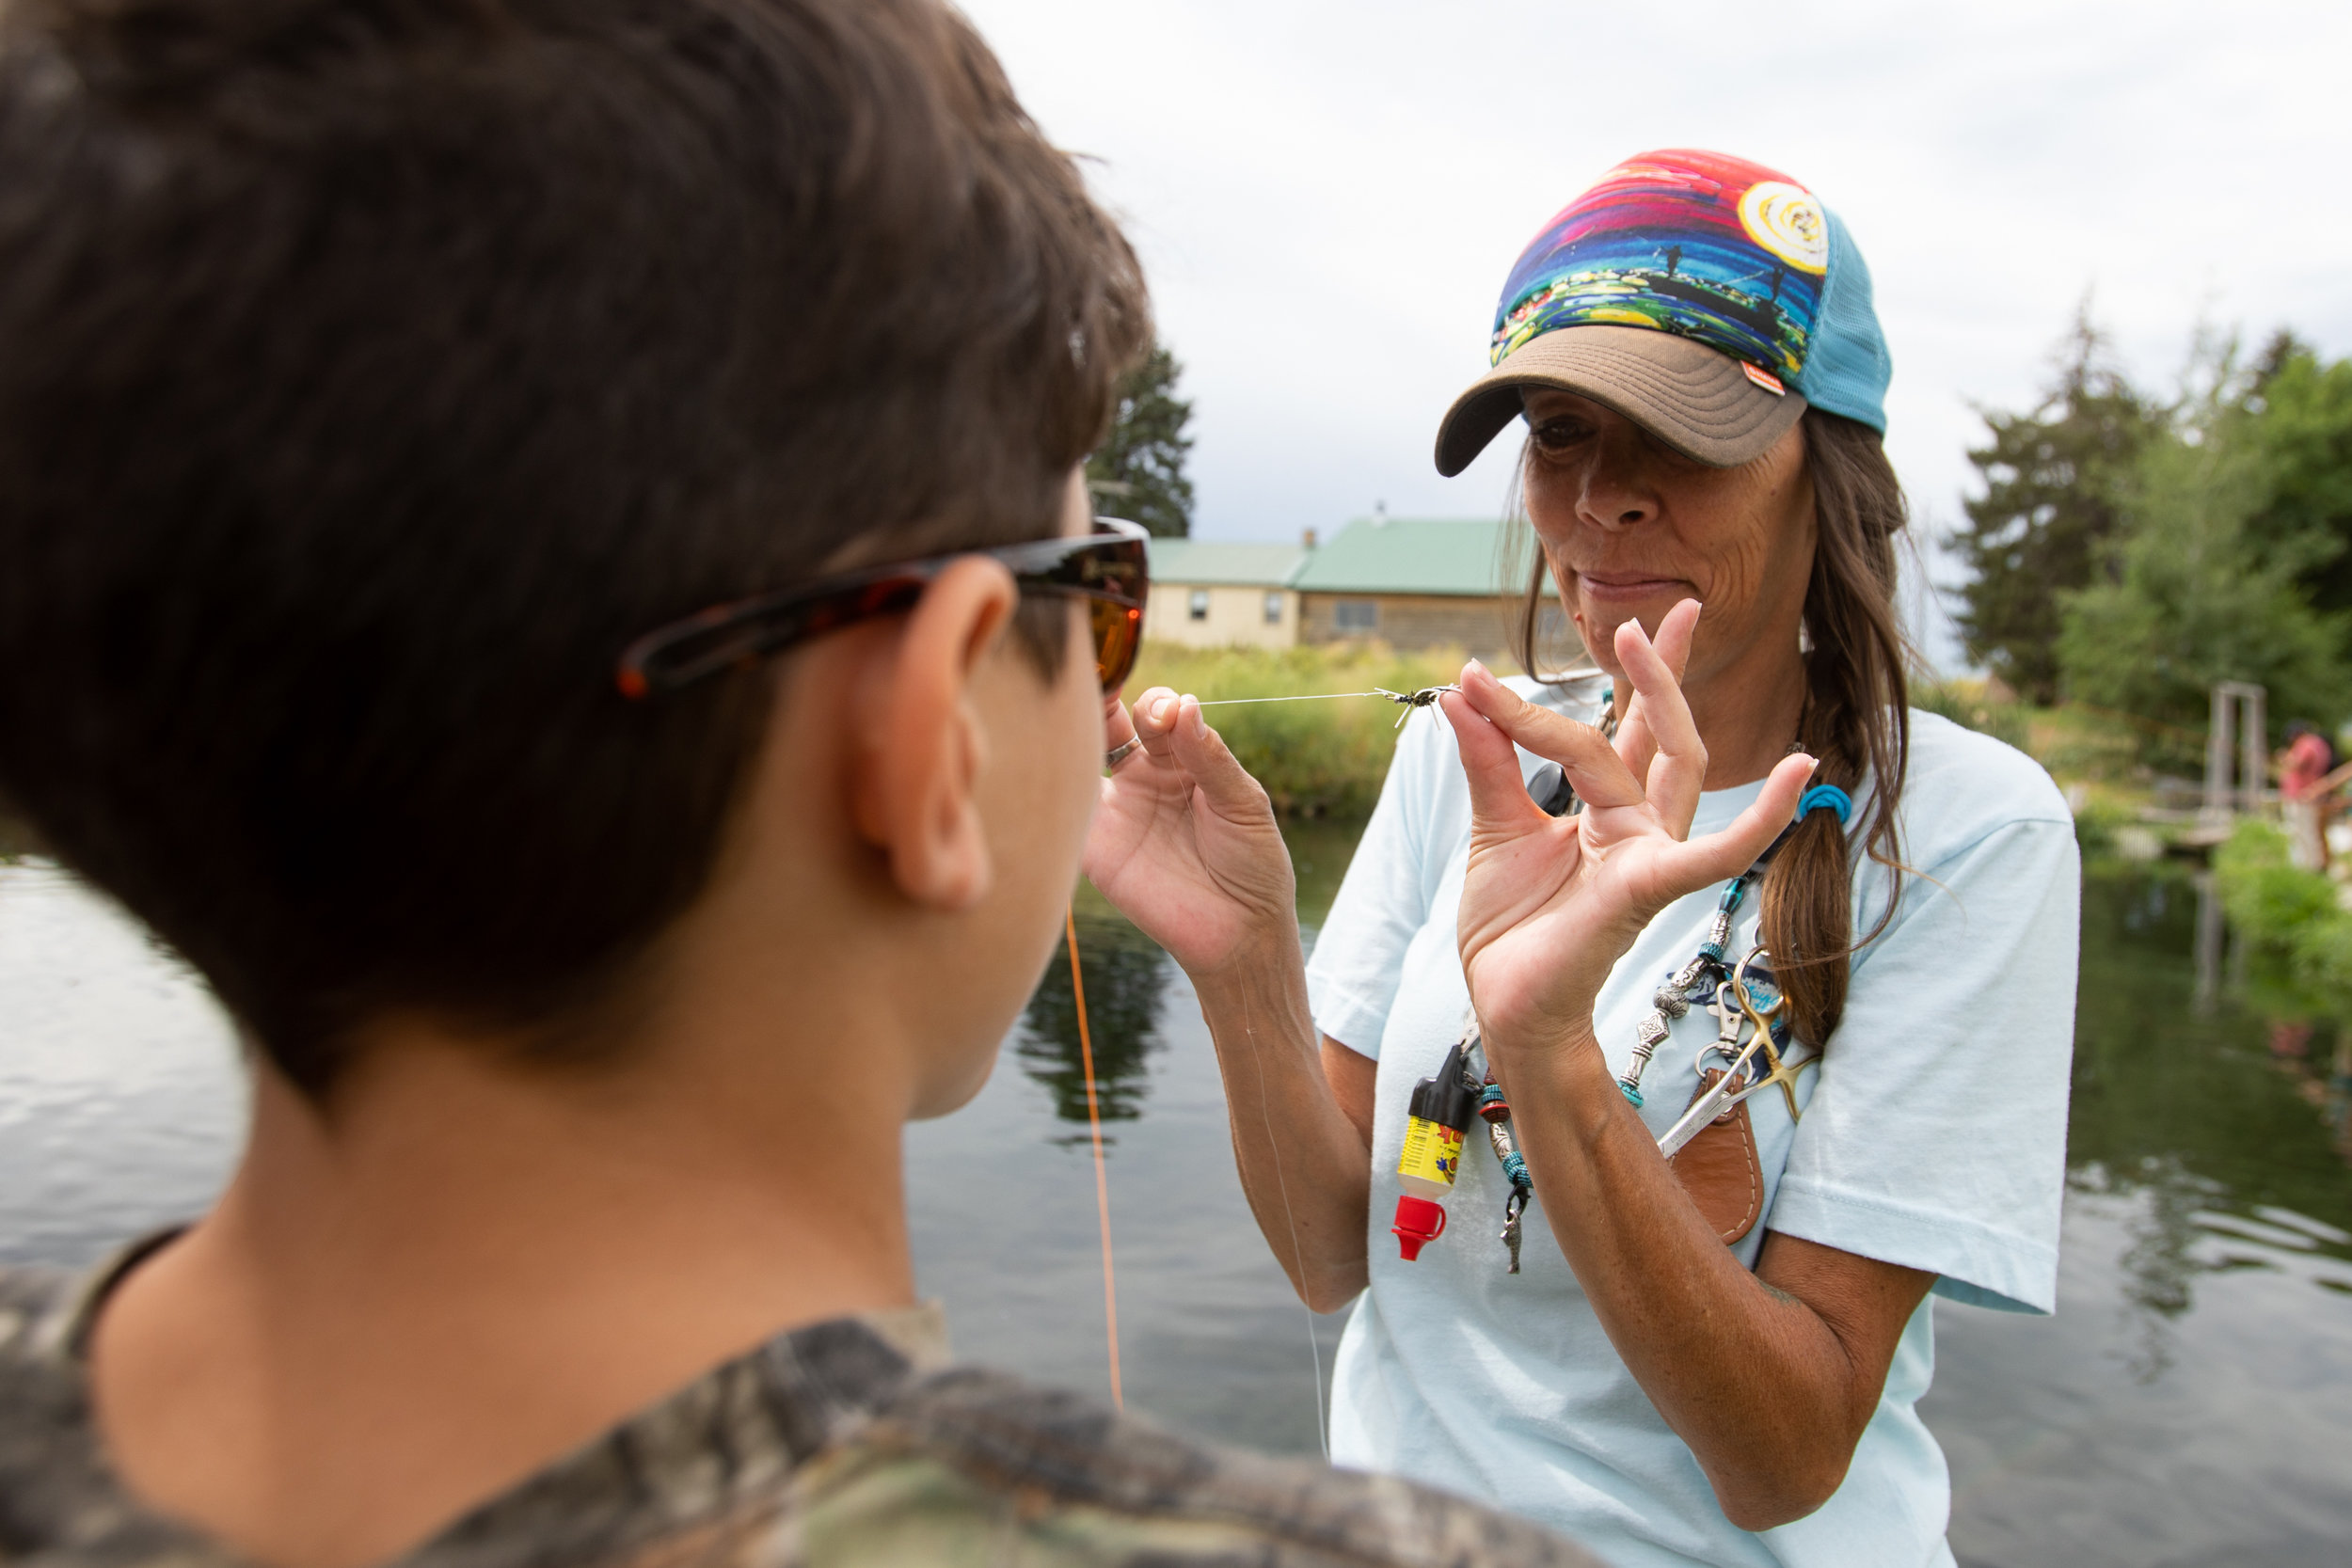  Verlicia Perez, lead mentor for The Utah Mayfly Project, teaches a foster care child how to tie a fly on his fly line at a trout pond on Saturday, July 14, 2018, in Smithfield. The Mayfly Project is a national non-profit that uses fly fishing to men